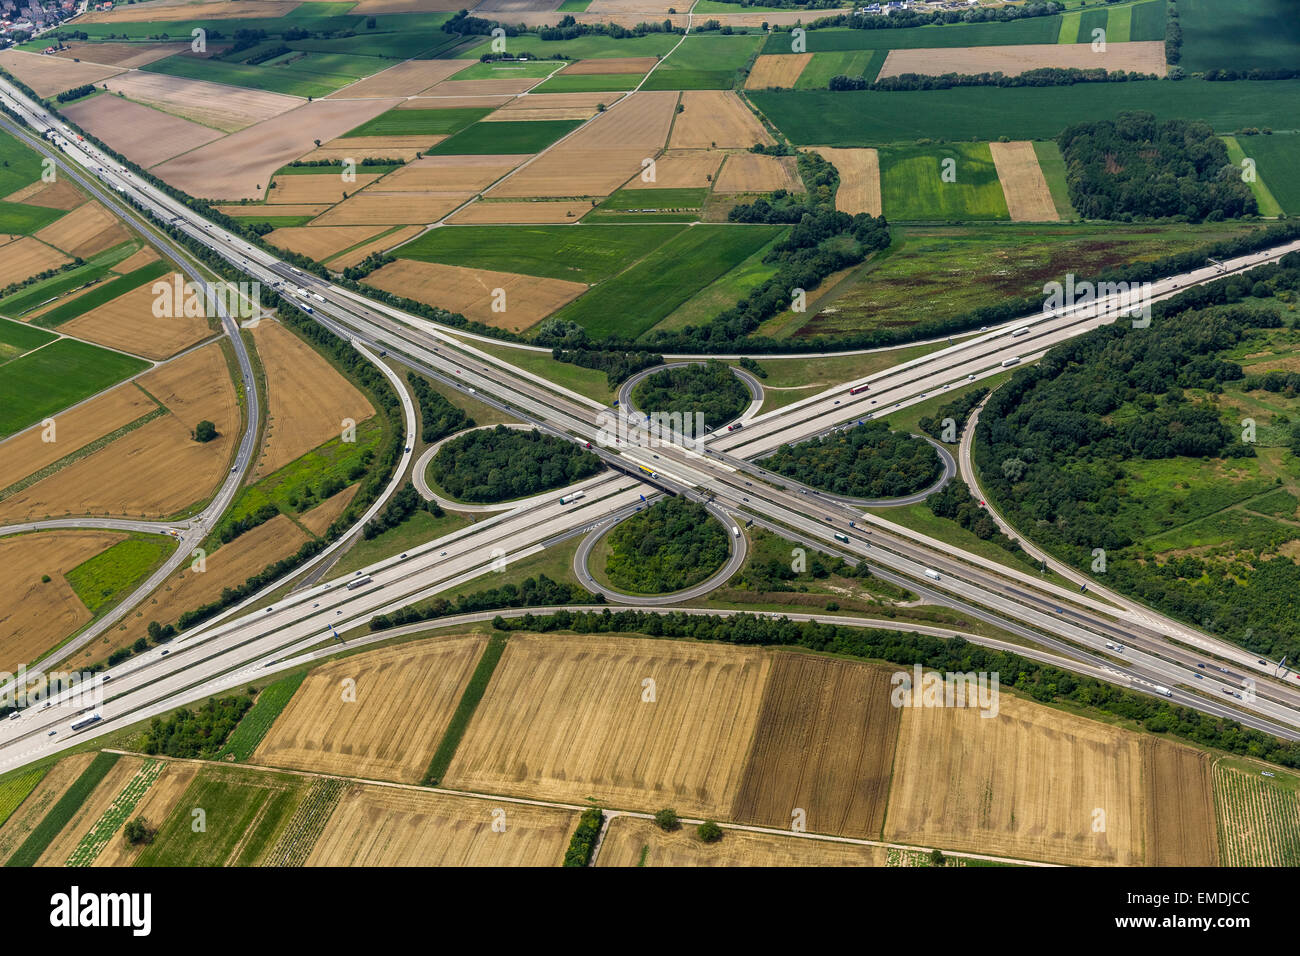 L'autoroute Walldorf, A5 et A6, forme trèfle, Walldorf, Bade-Wurtemberg, Allemagne Banque D'Images